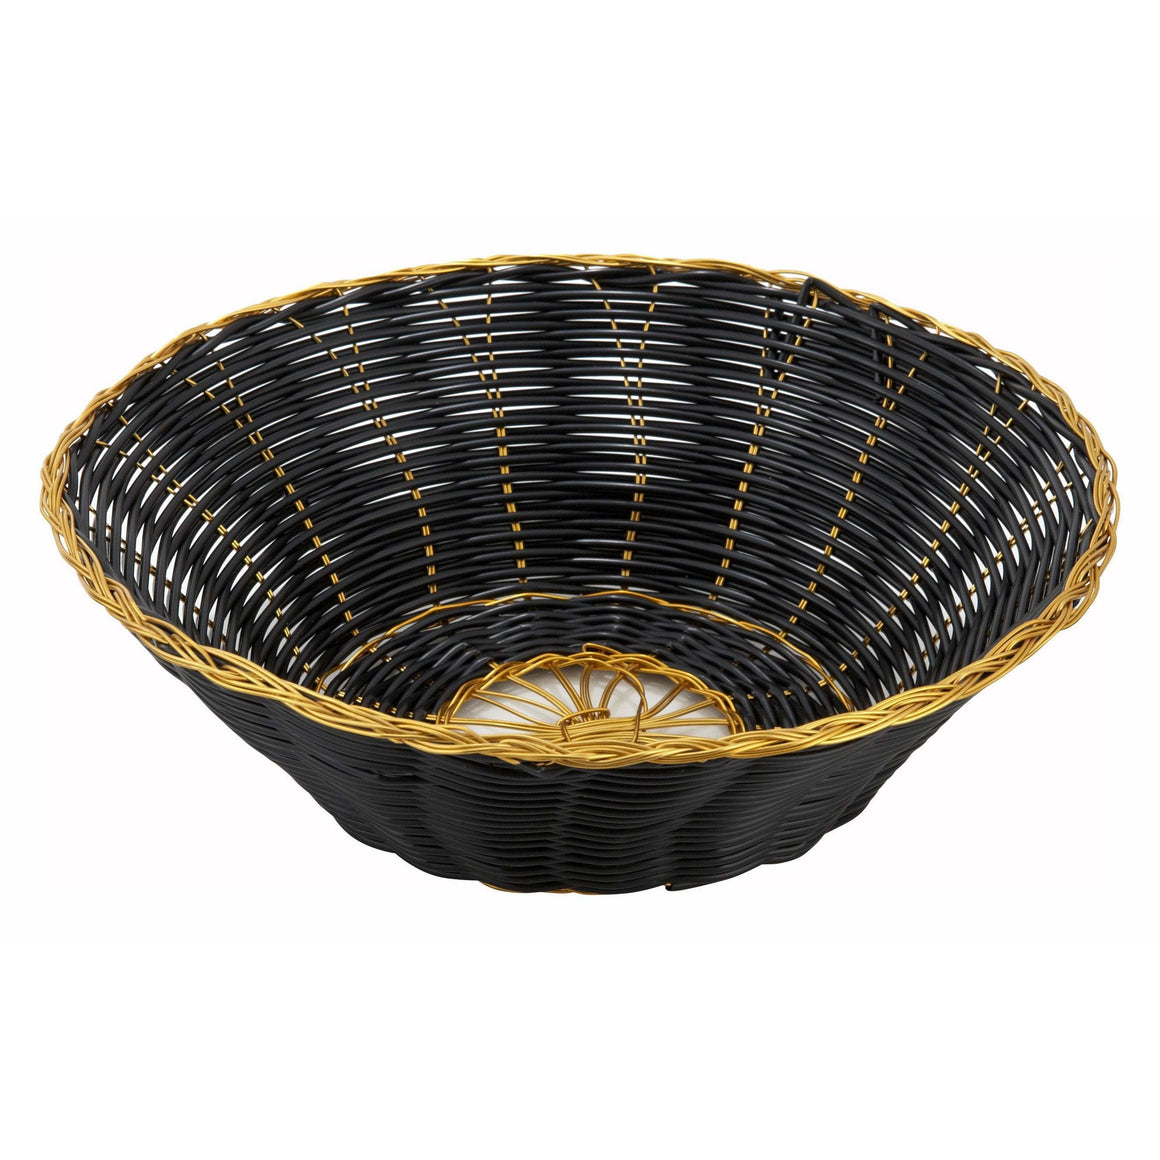 Winco - PWBK-8R - Poly Woven Baskets, Round, 8-1/4" x 2-1/4", Black/Gold - Tabletop - Maltese & Co New and Used  restaurant Equipment 